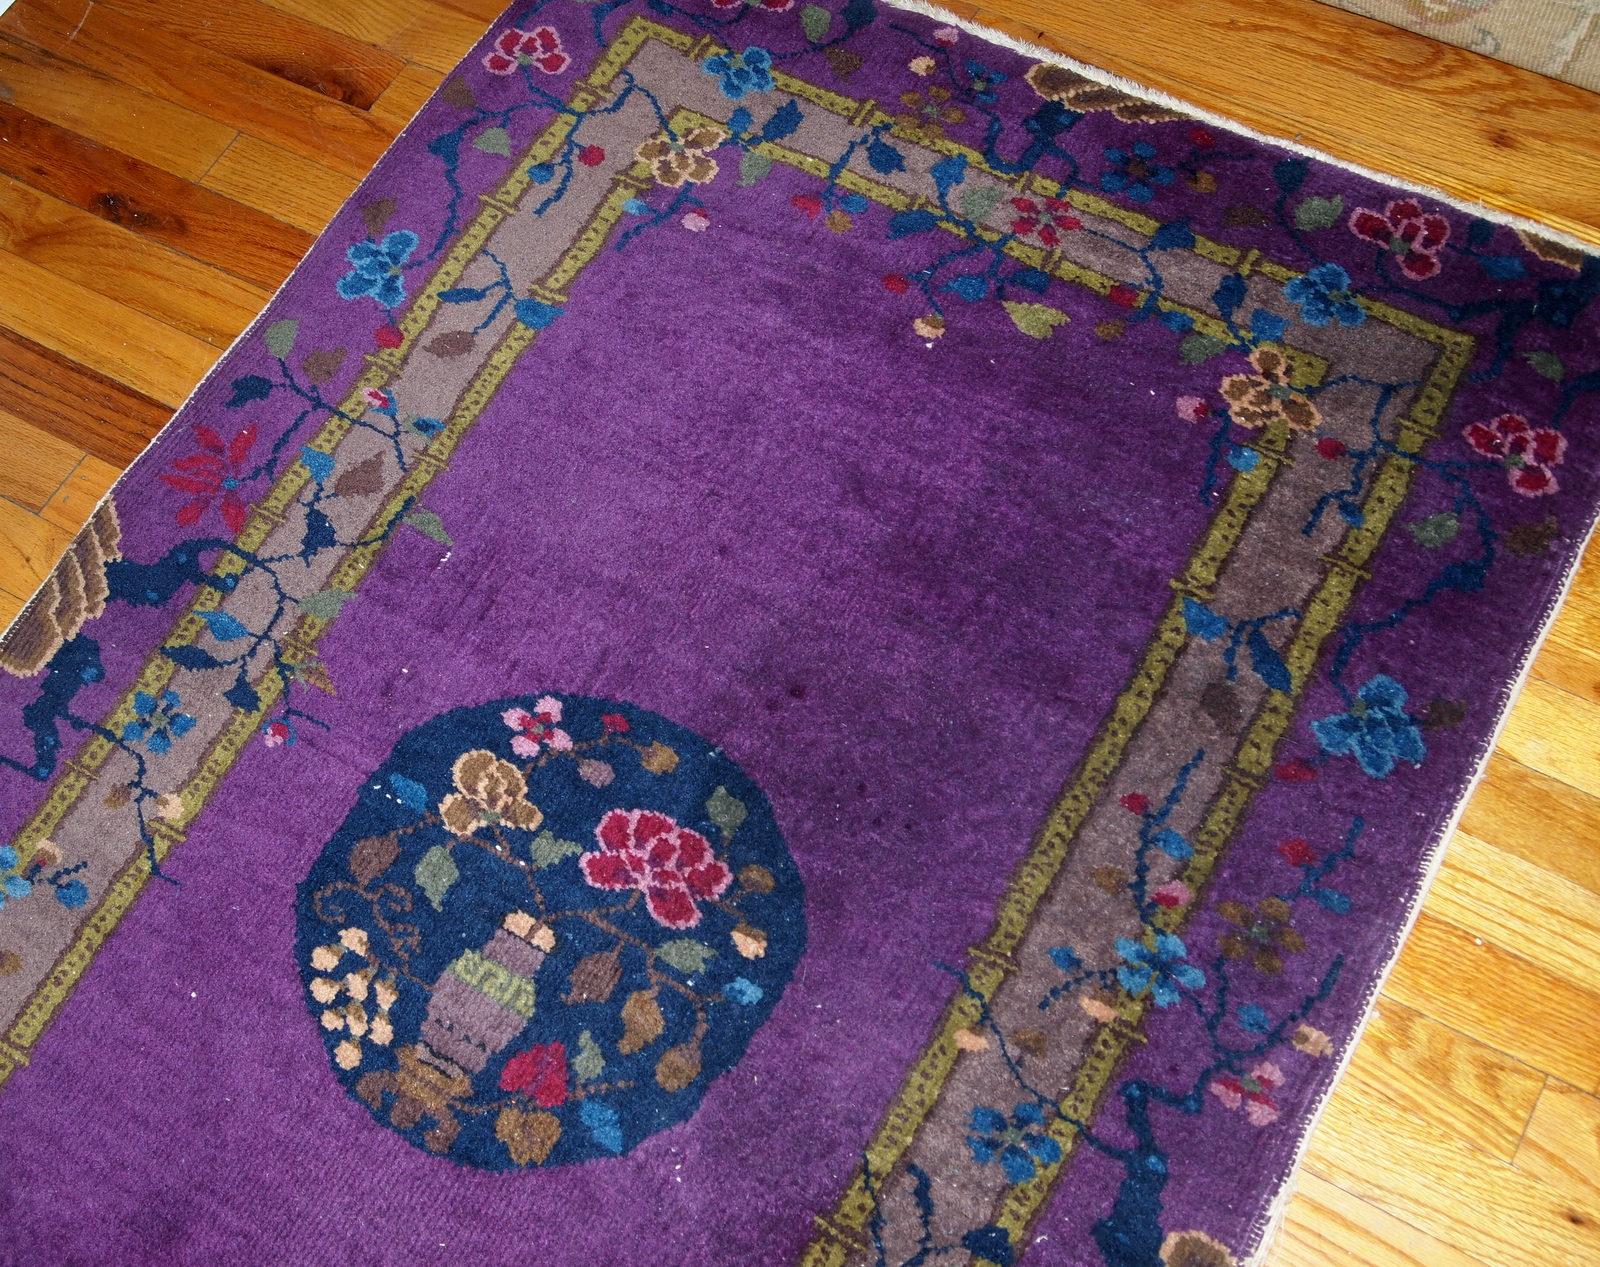 Antique handmade Art Deco Chinese rug in purple shade. It has been made in wool in the beginning of 20th century.

-condition: Original good,

-circa: 1920s,

-size: 2.10' x 4.9' (89cm x 149cm),

-material: Wool,

-country of origin: